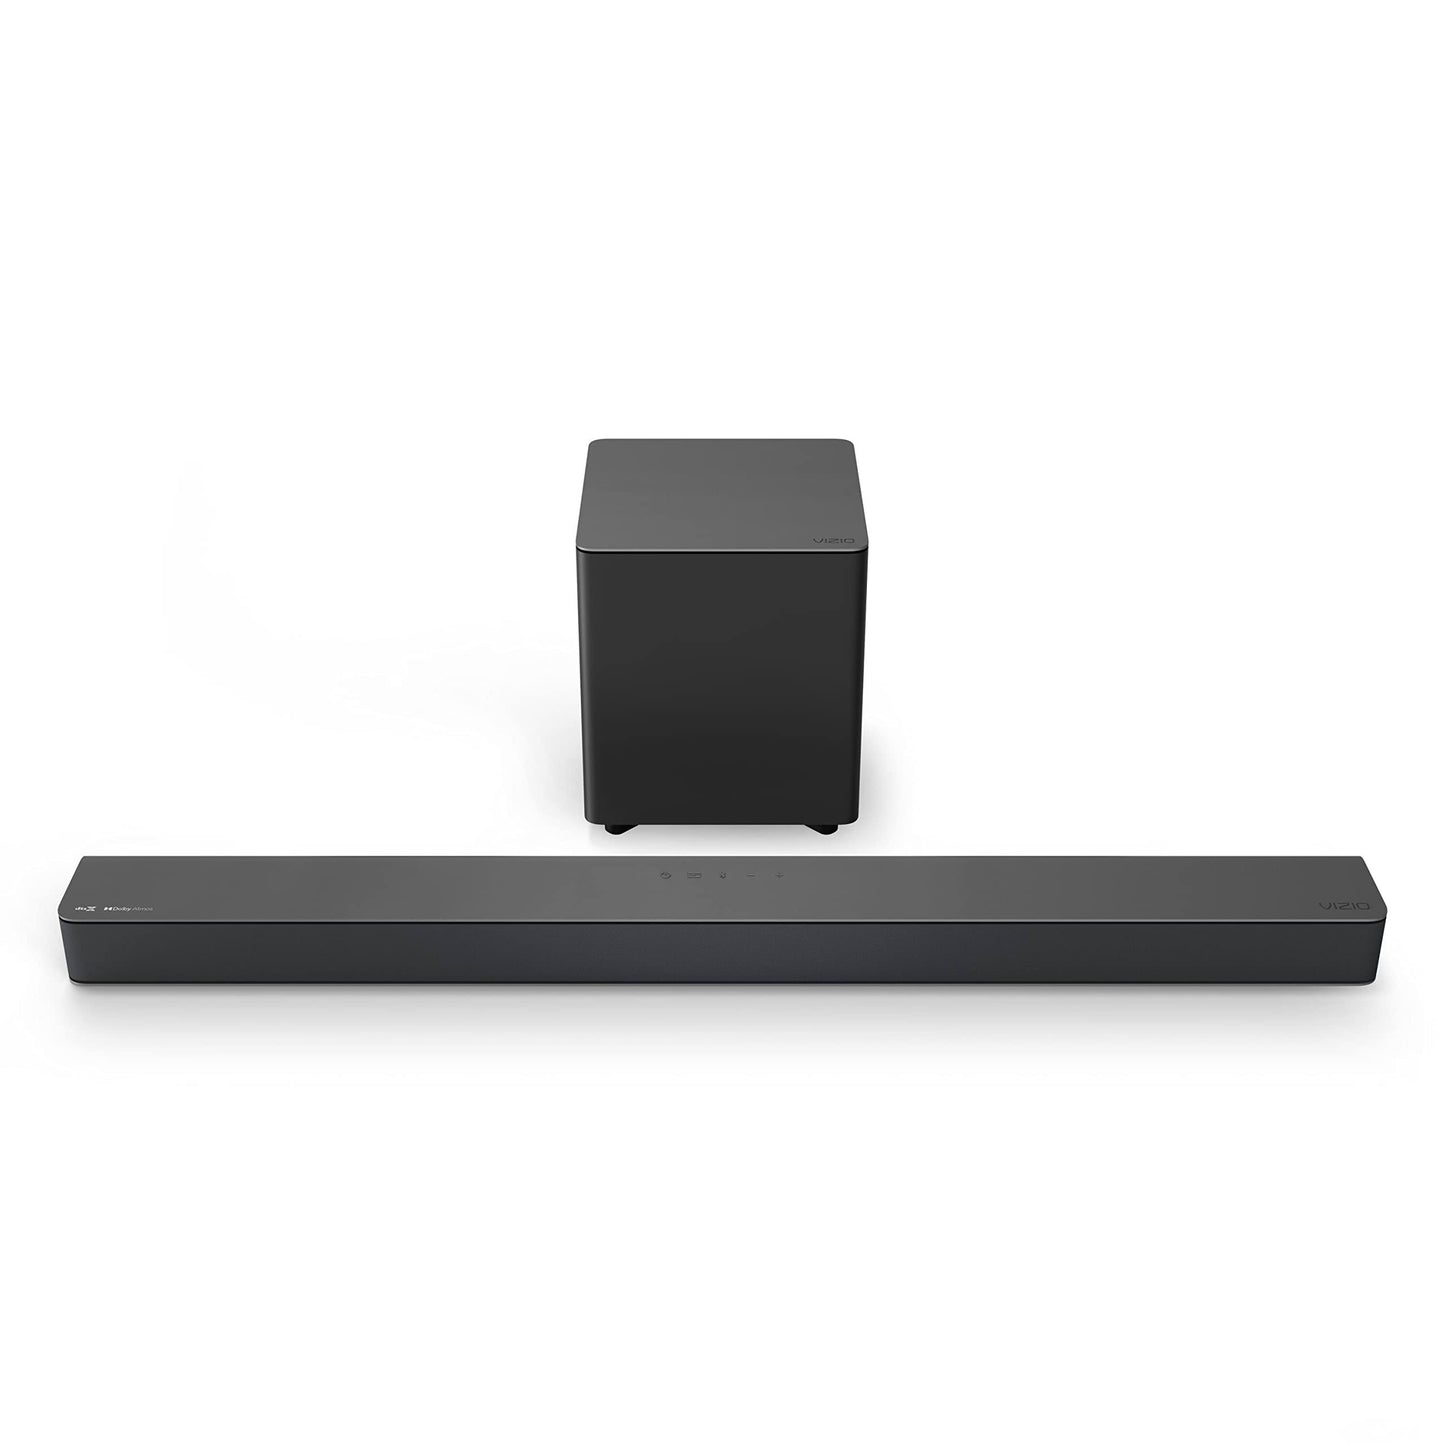 M-Series 2.1 Premium Sound Bar With Dolby Atmos Dts:X Wireless Subwoofer M215a-J6